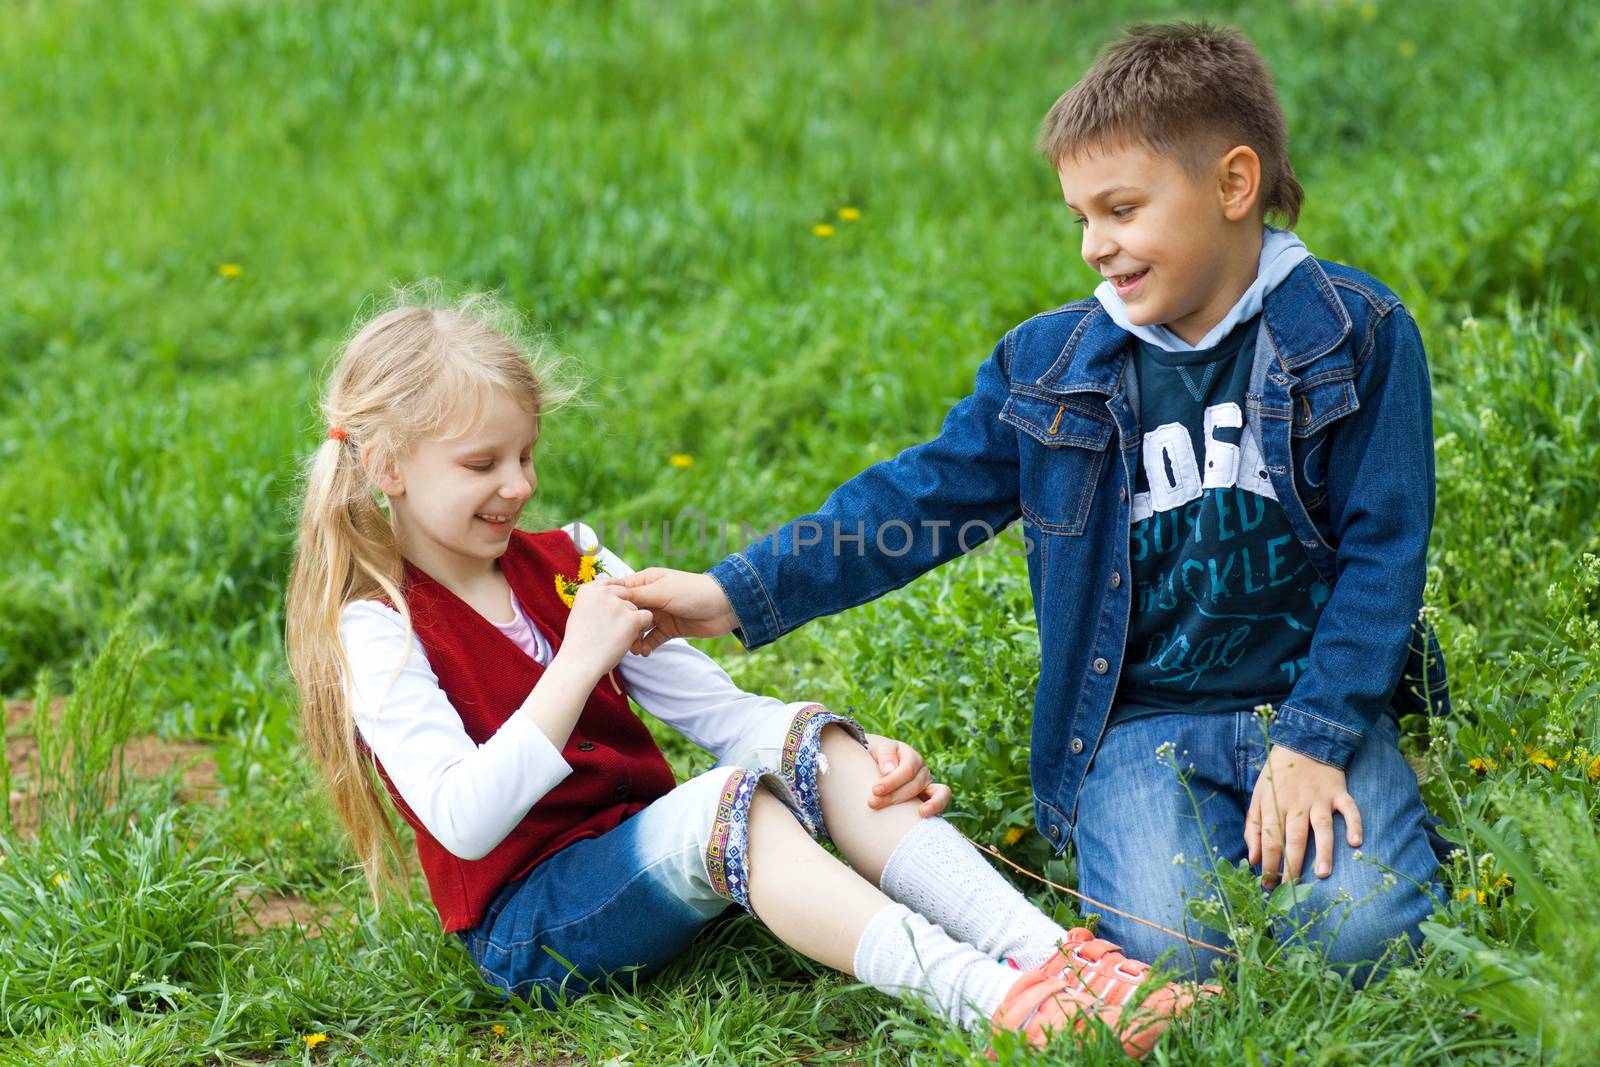 boy giving flowers to a girl by vsurkov